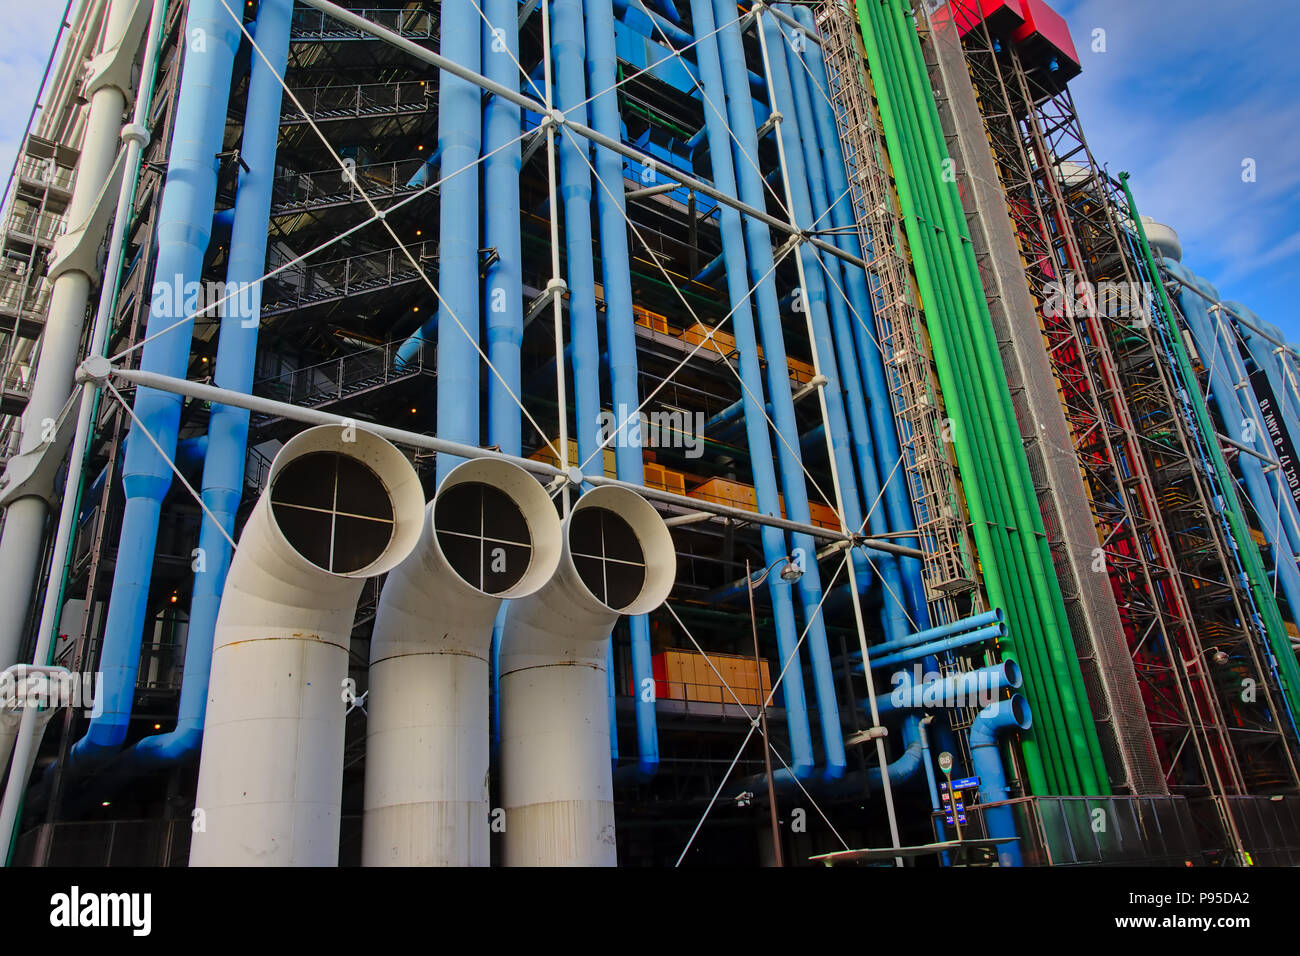 Detail of the Modern  high-tech architecture of the Centre Georges Pompidou, with colorfull pipes in Paris, France. The building was designed by archi Stock Photo